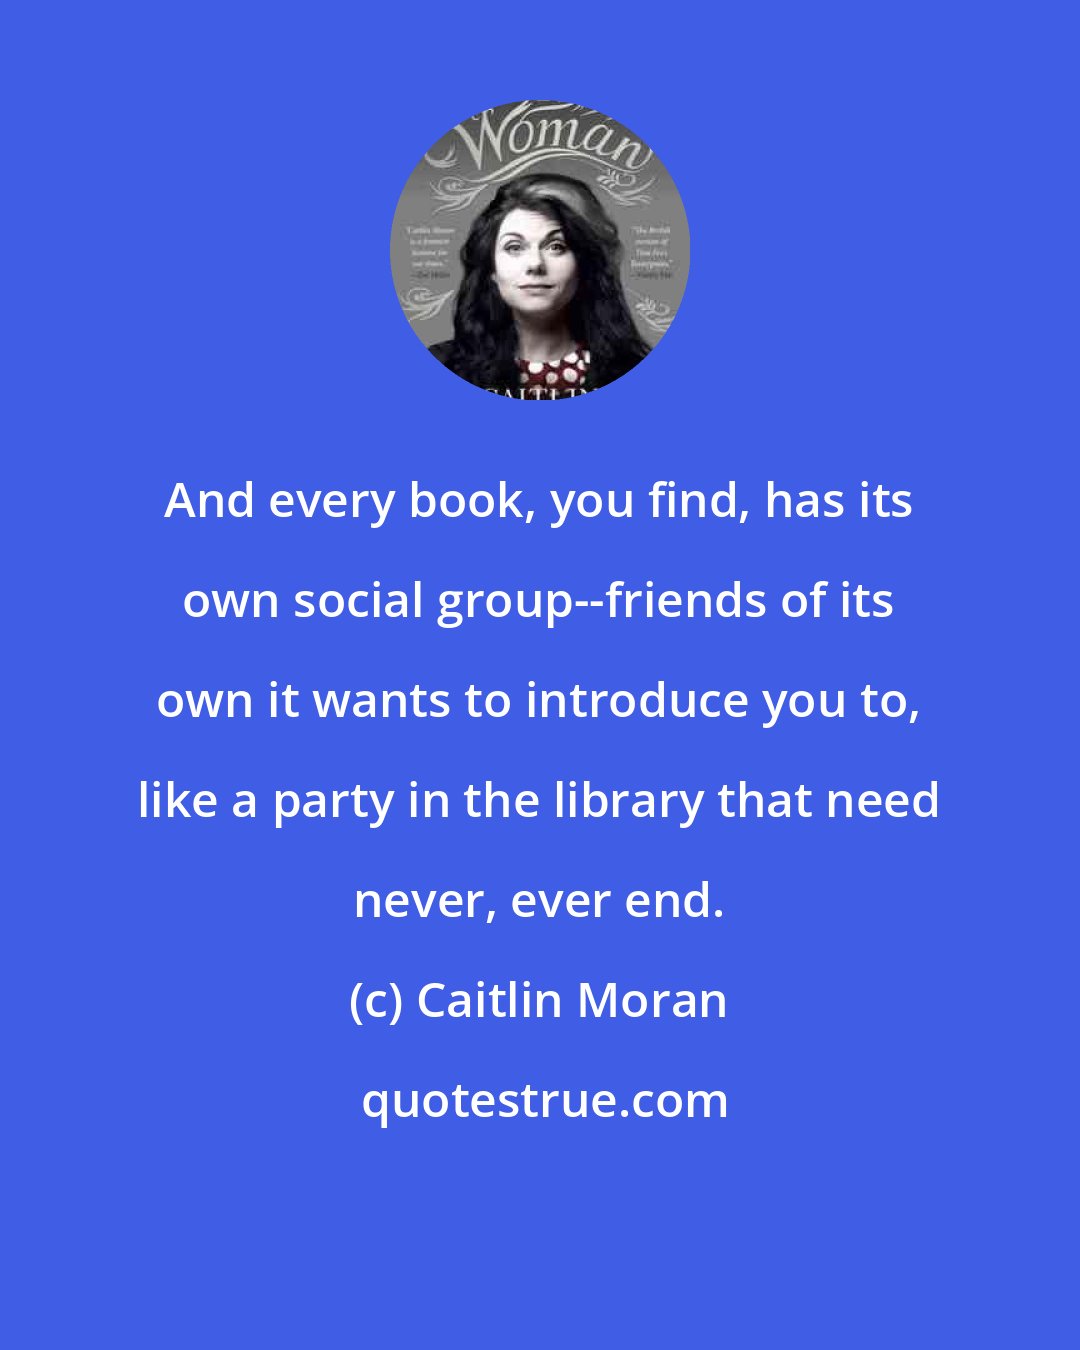 Caitlin Moran: And every book, you find, has its own social group--friends of its own it wants to introduce you to, like a party in the library that need never, ever end.